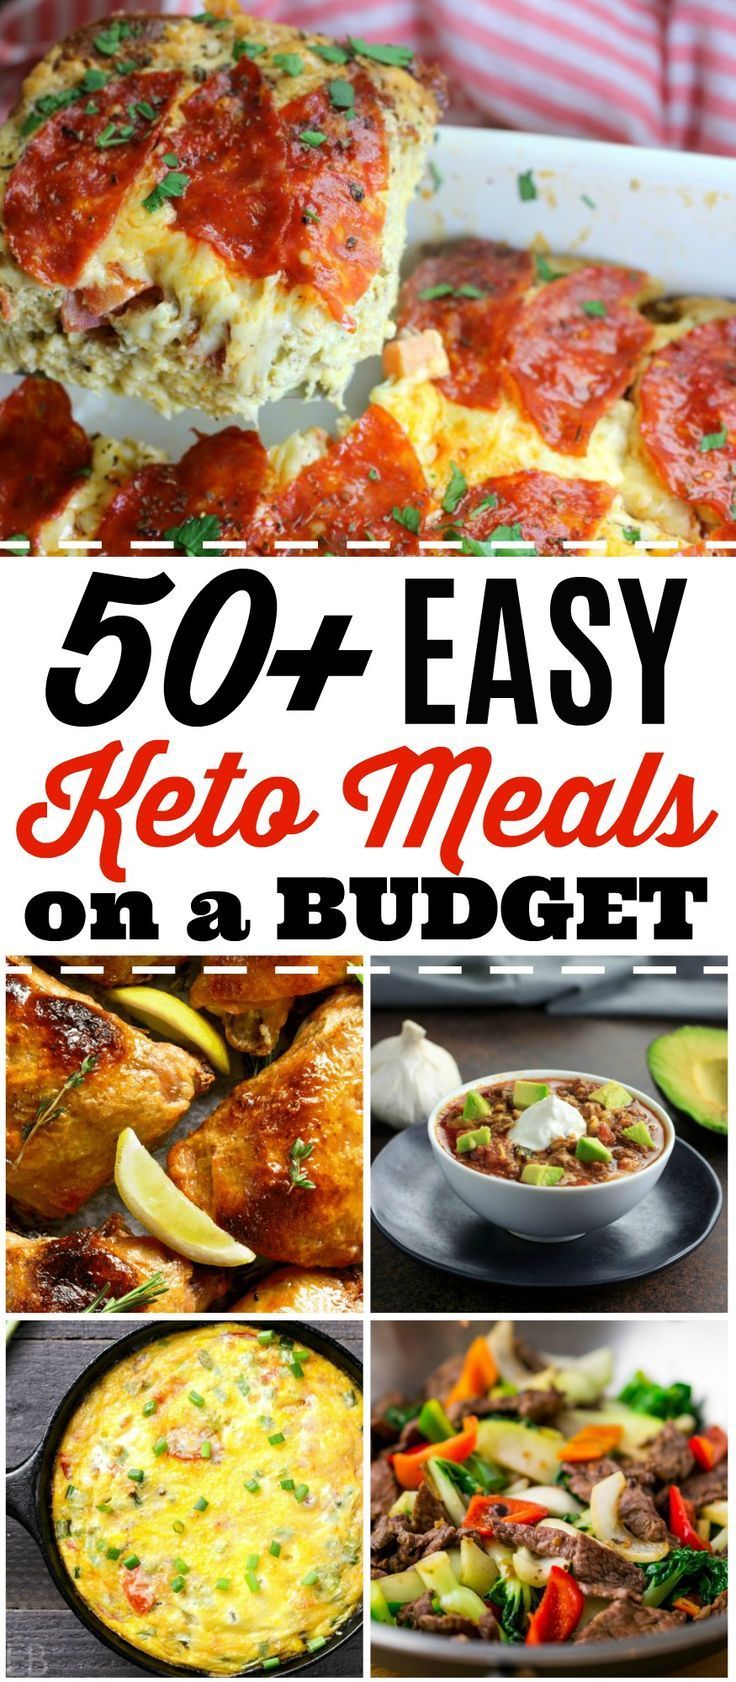 50+ Easy Keto & Low Carb Meals on a Budget {Paleo and GAPS Diet-friendly too + 7 Tips for Quality Food Keto Shopping on a Budget -   21 budget diet meals
 ideas